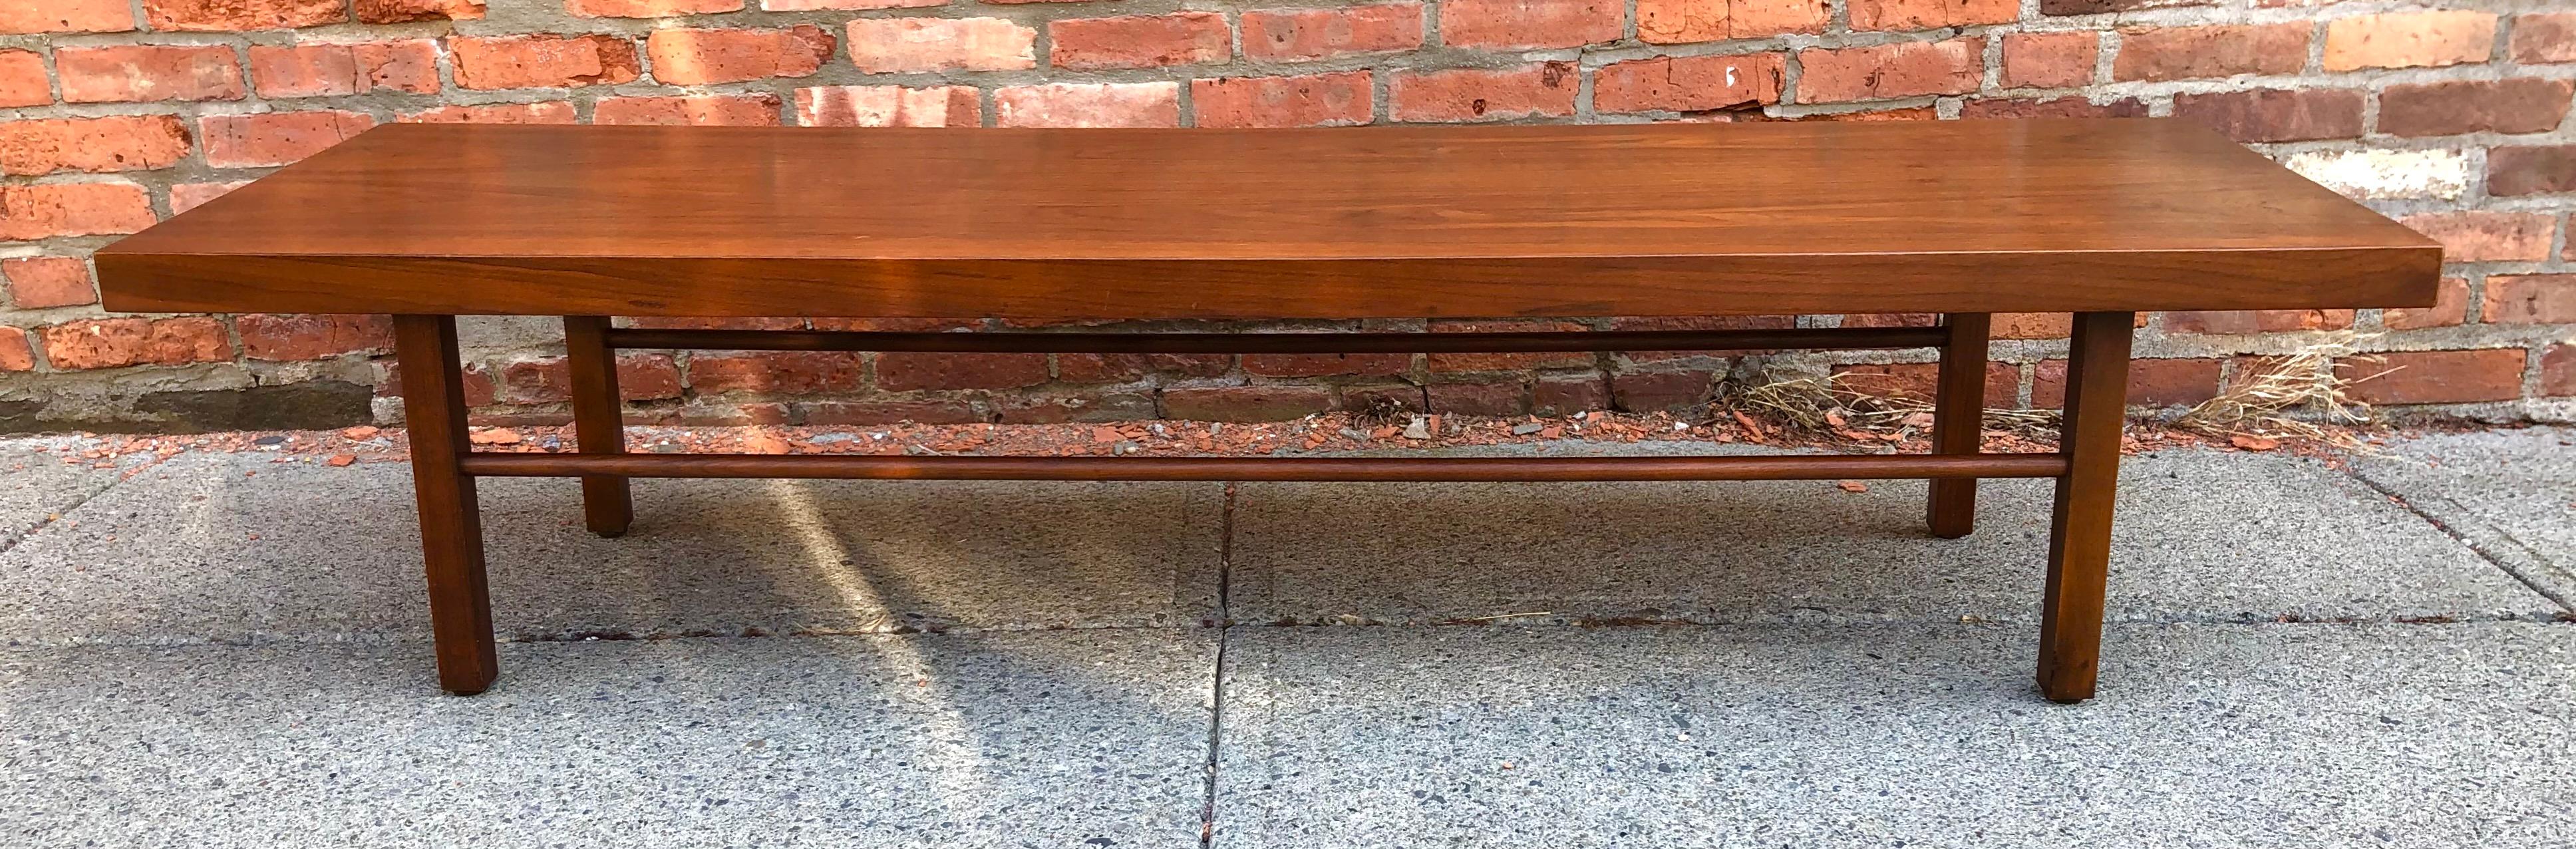 Milo Baughman Low Walnut Long Bench or Coffee Table In Good Condition For Sale In Brooklyn, NY